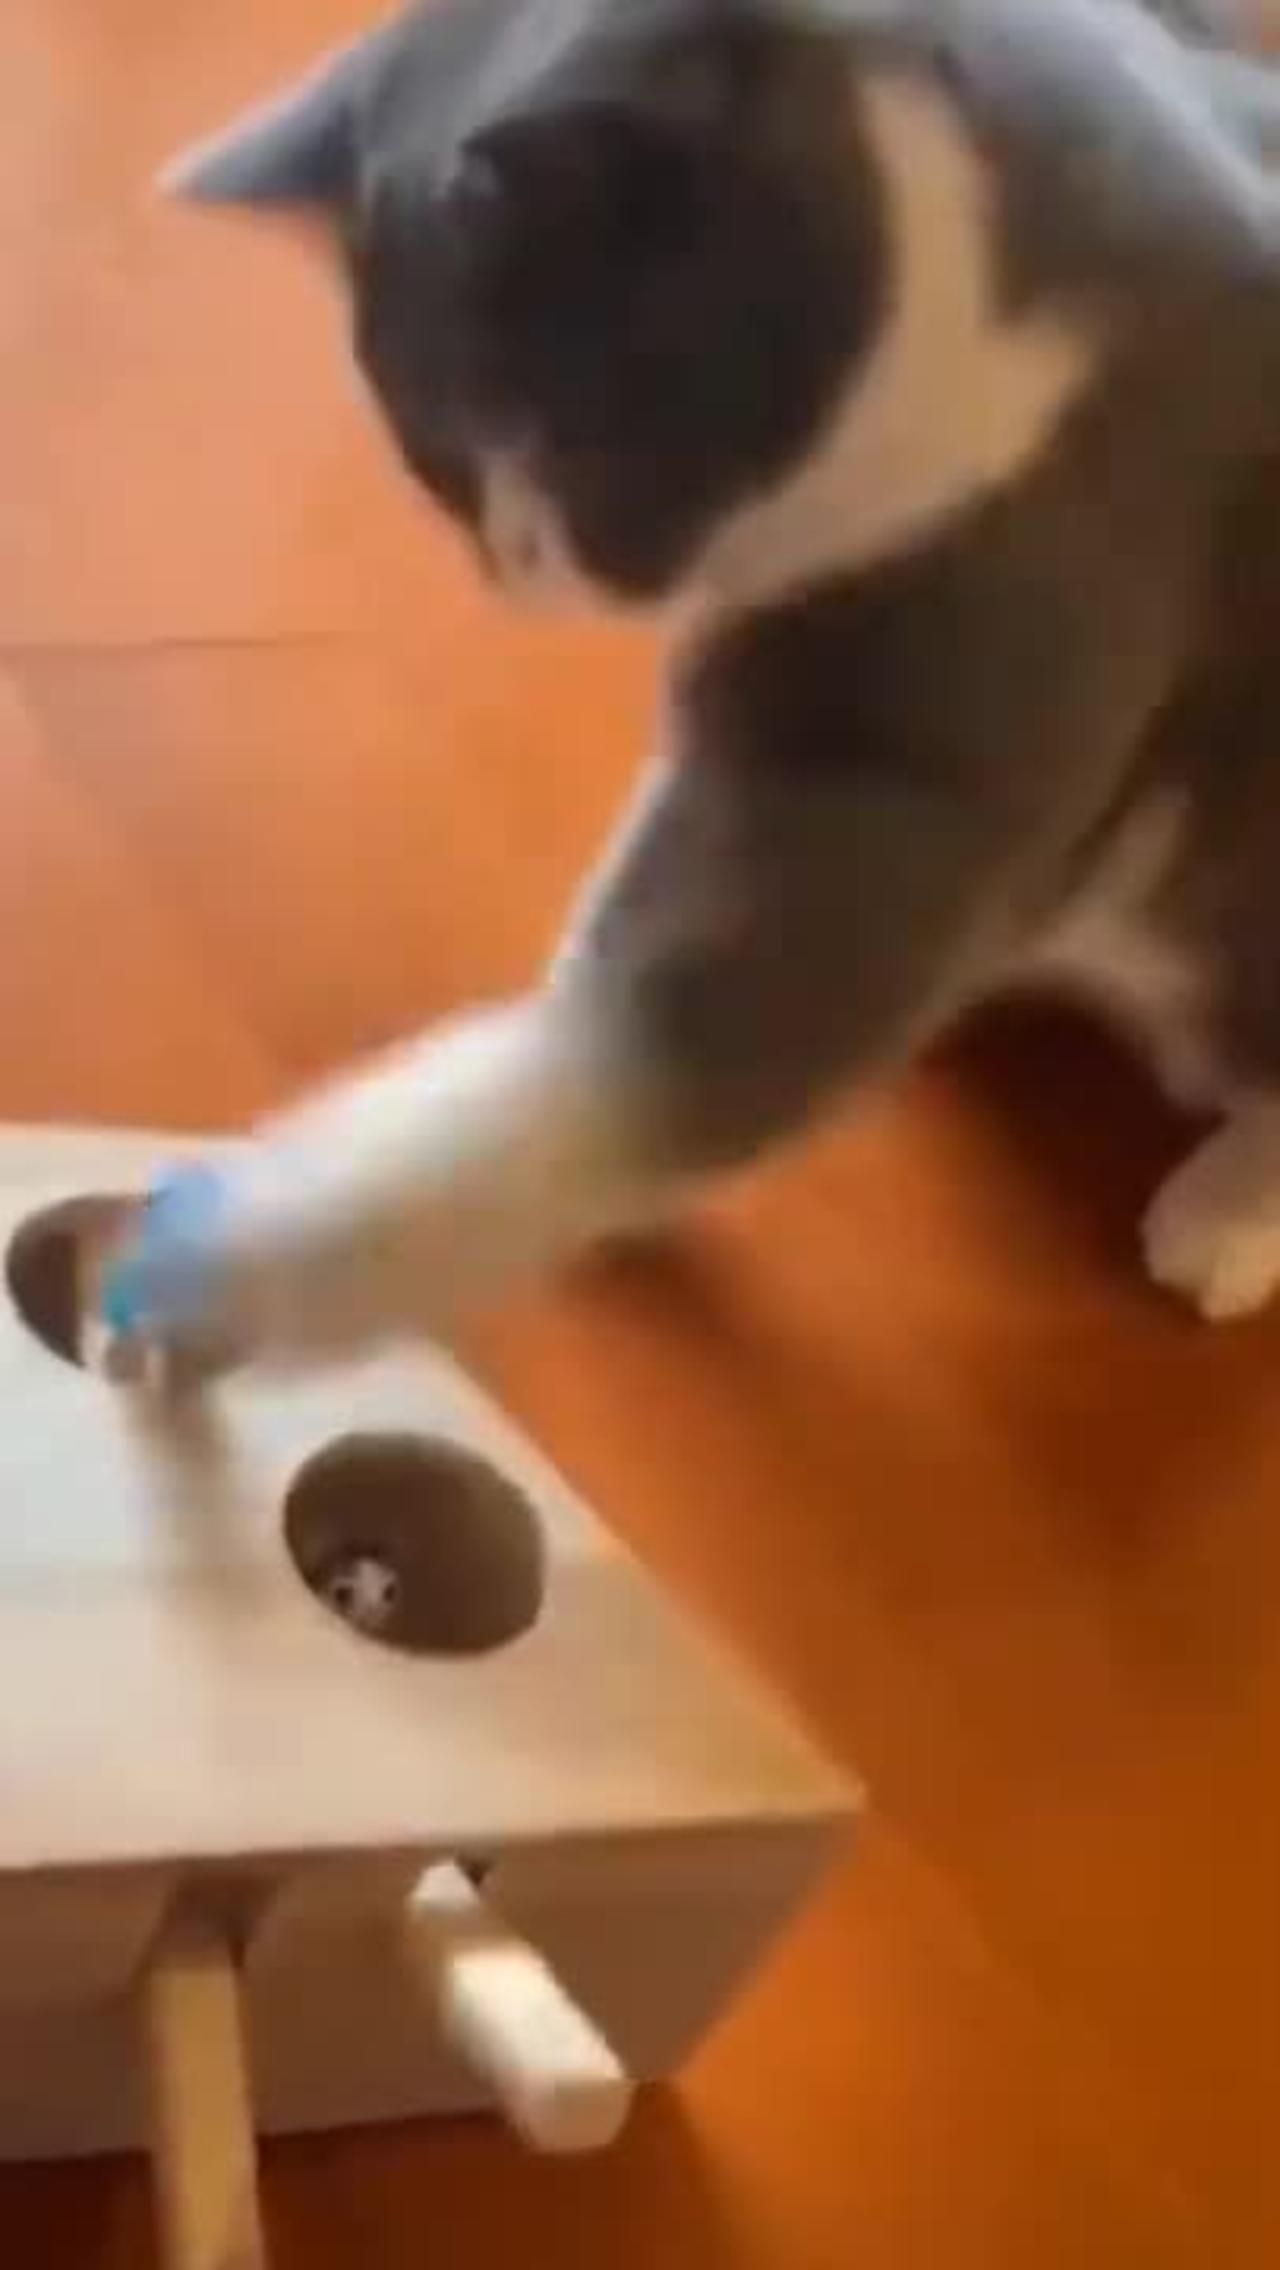 Unsuccessful comedy attempt by dogs and cats